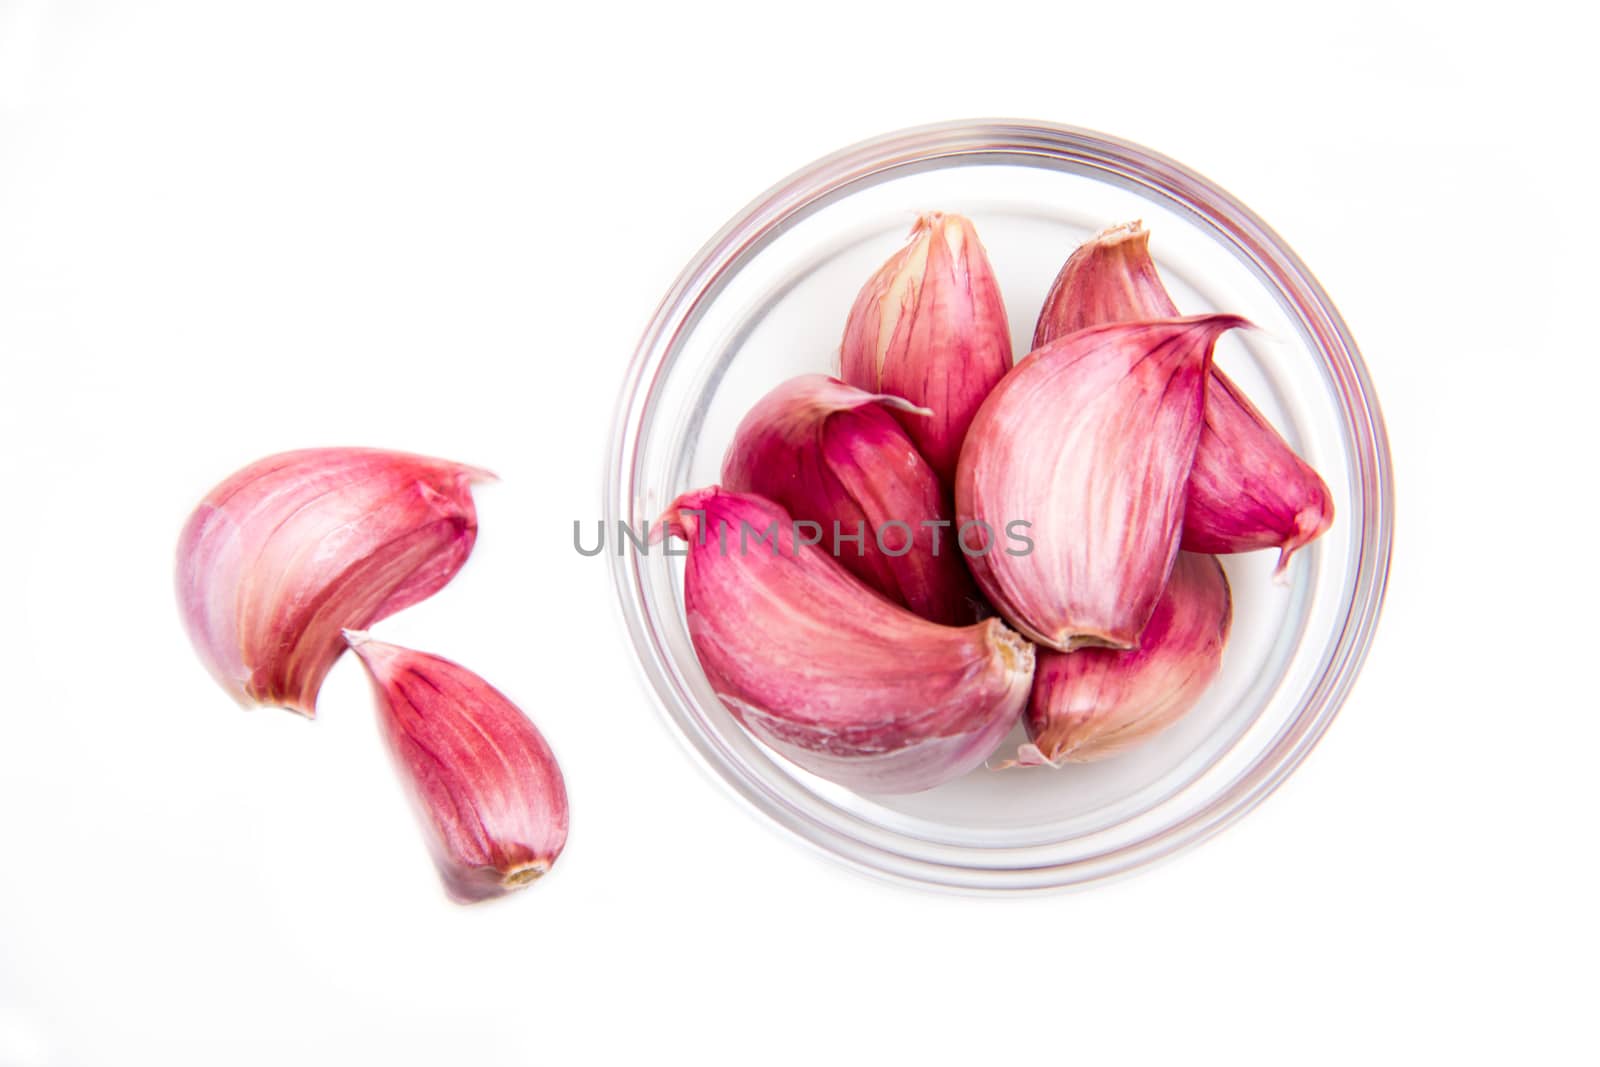 Garlic in glass bowl on a white background seen from above